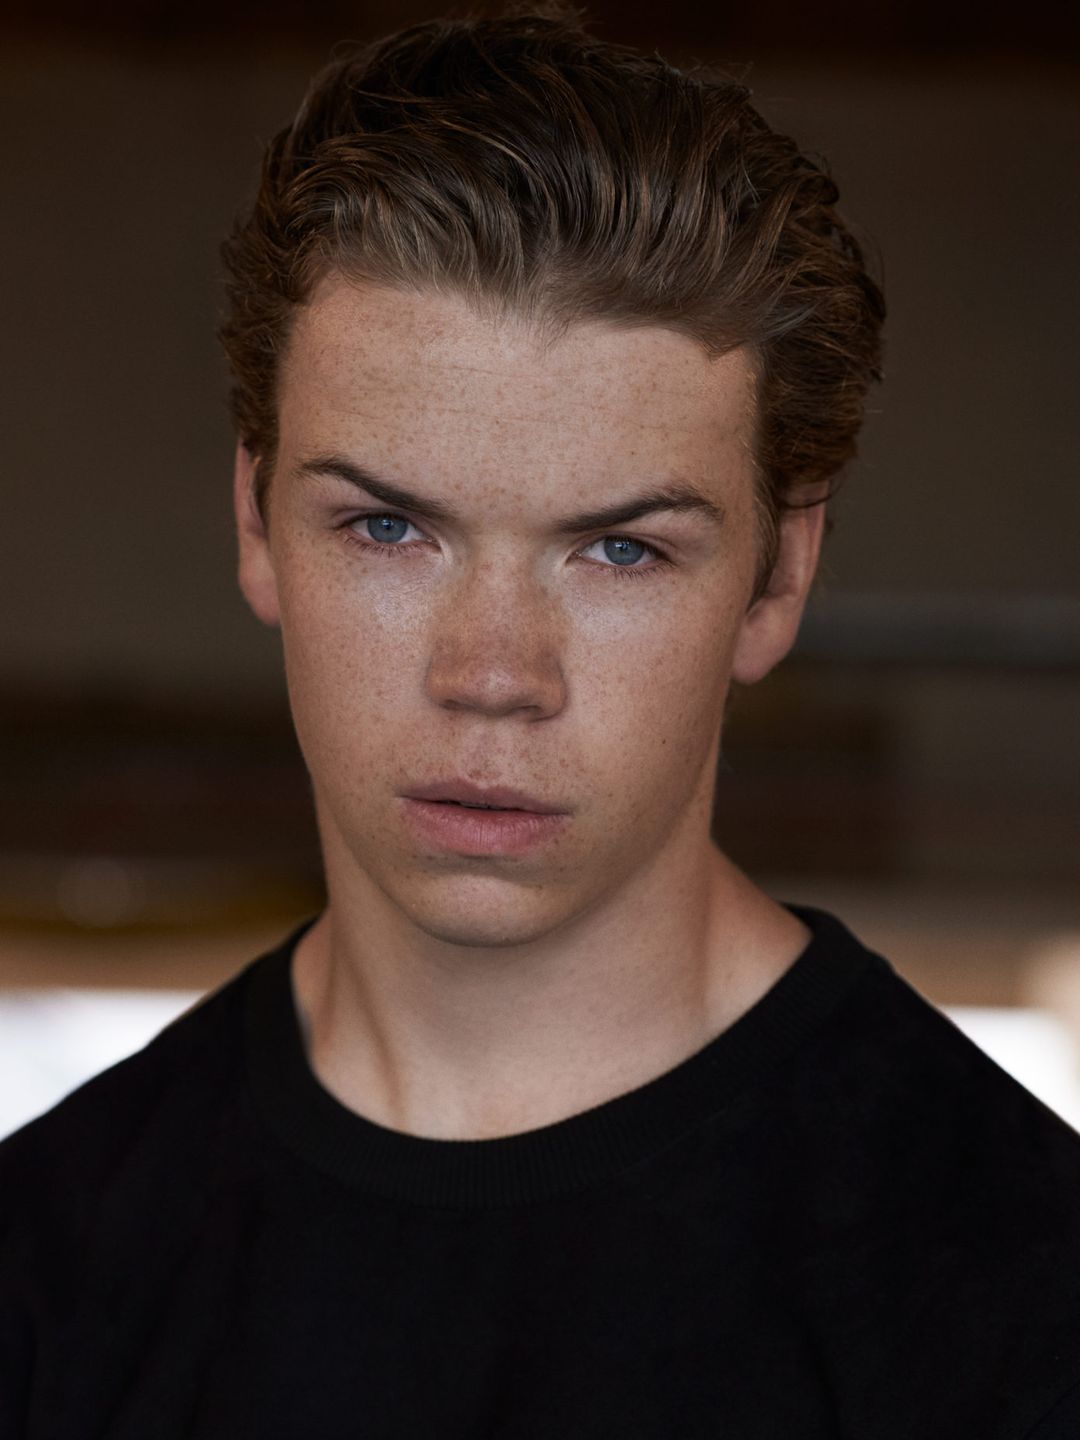 Will Poulter story of success